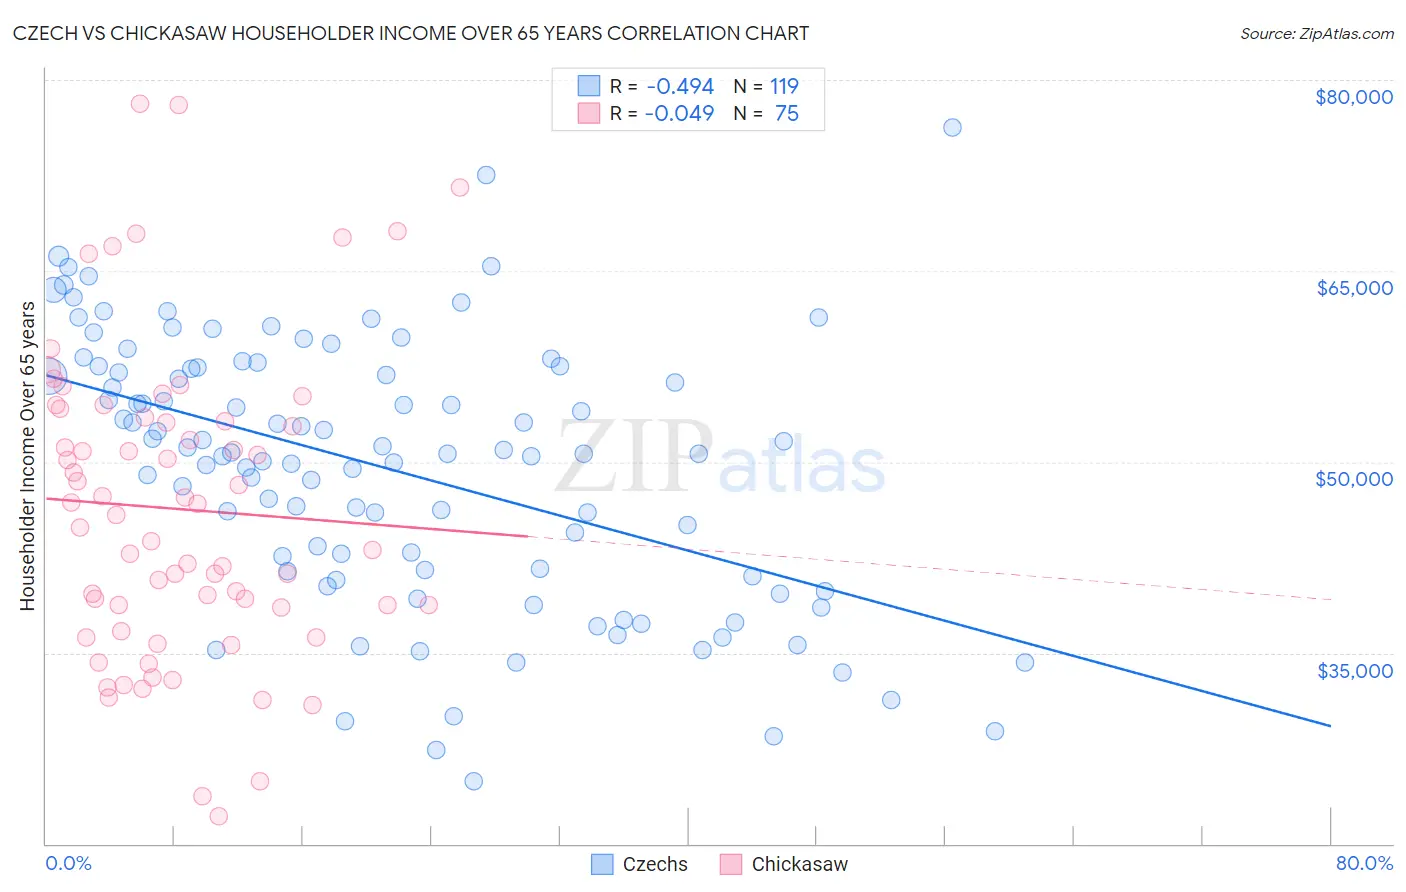 Czech vs Chickasaw Householder Income Over 65 years